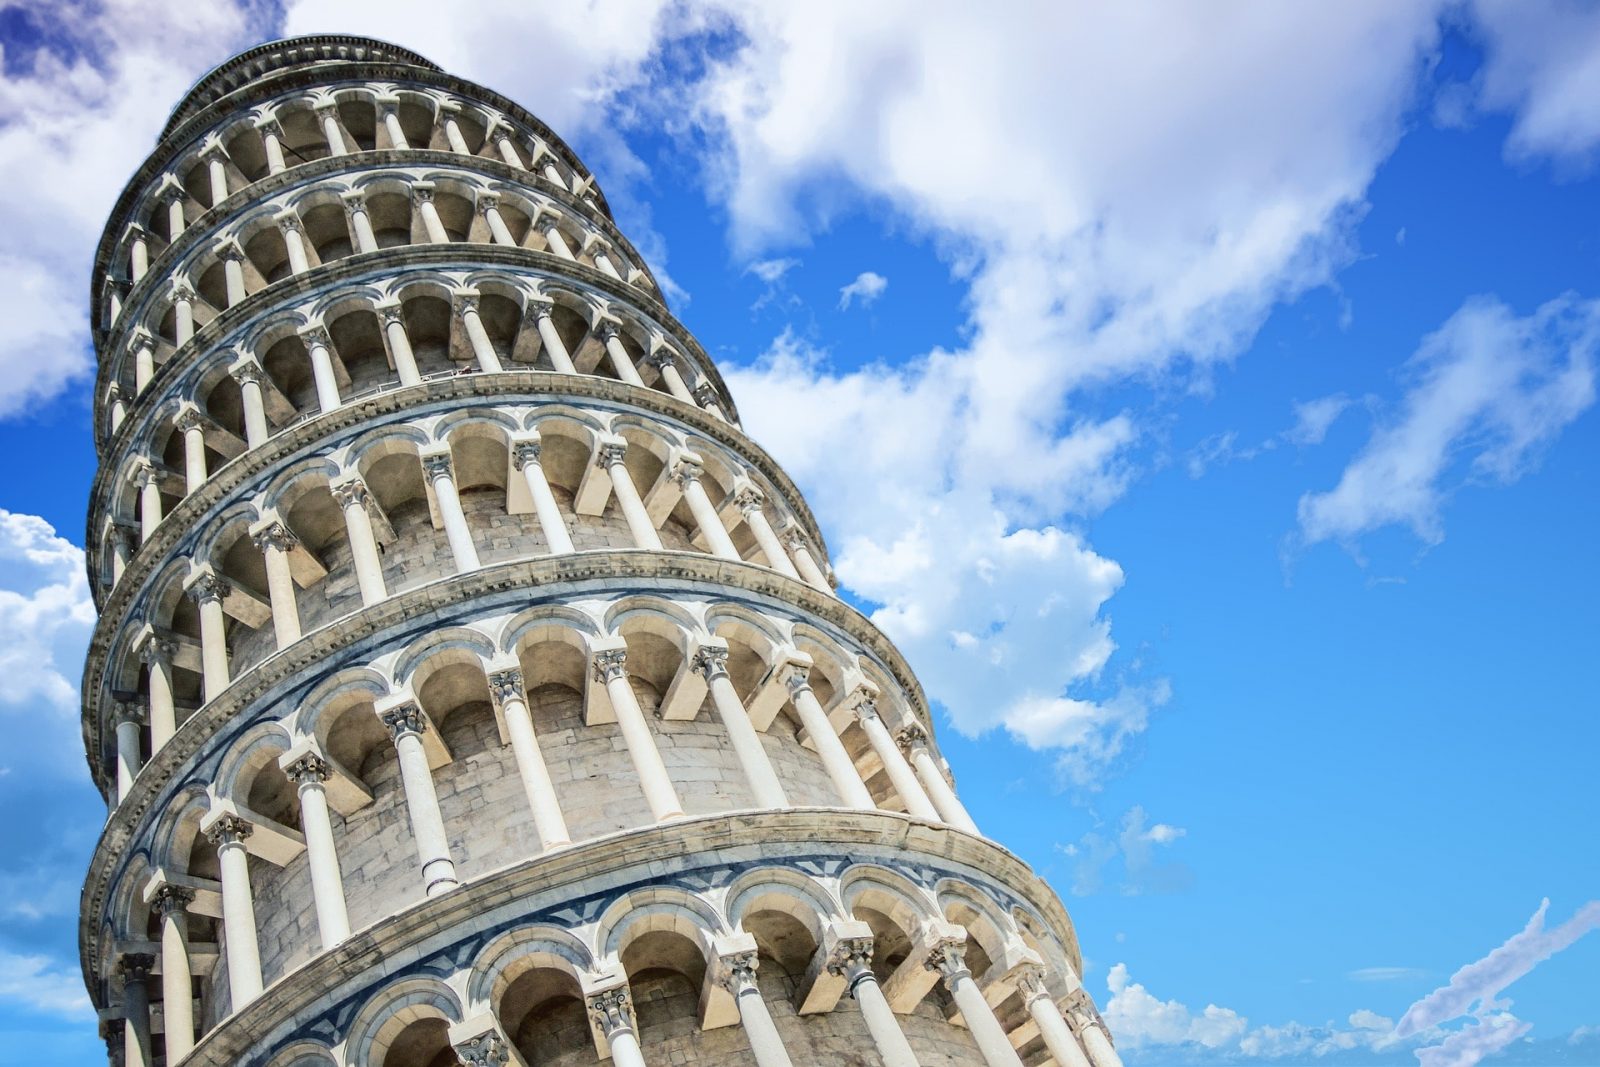 Countries Of The World Quiz The Leaning Tower Of Pisa, Italy